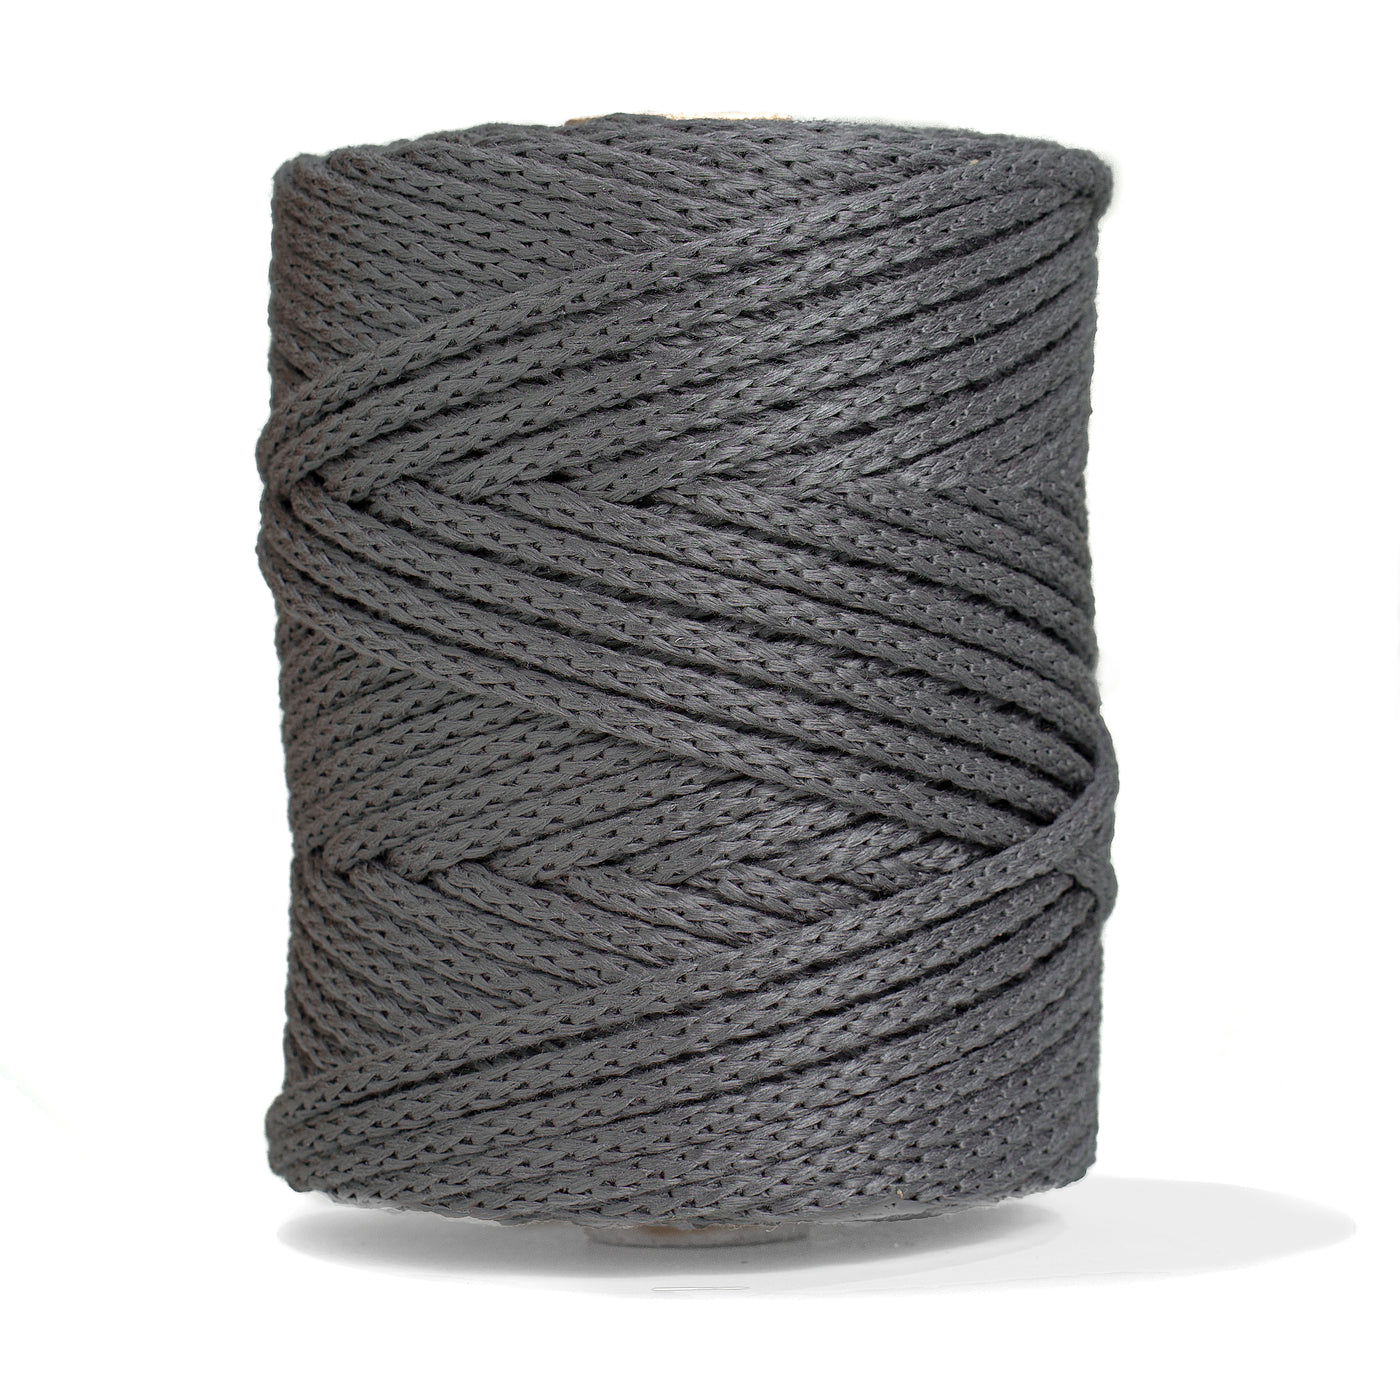 OUTDOOR RECYCLED BRAIDED CORD 6 MM -  CHARCOAL GRAY COLOR